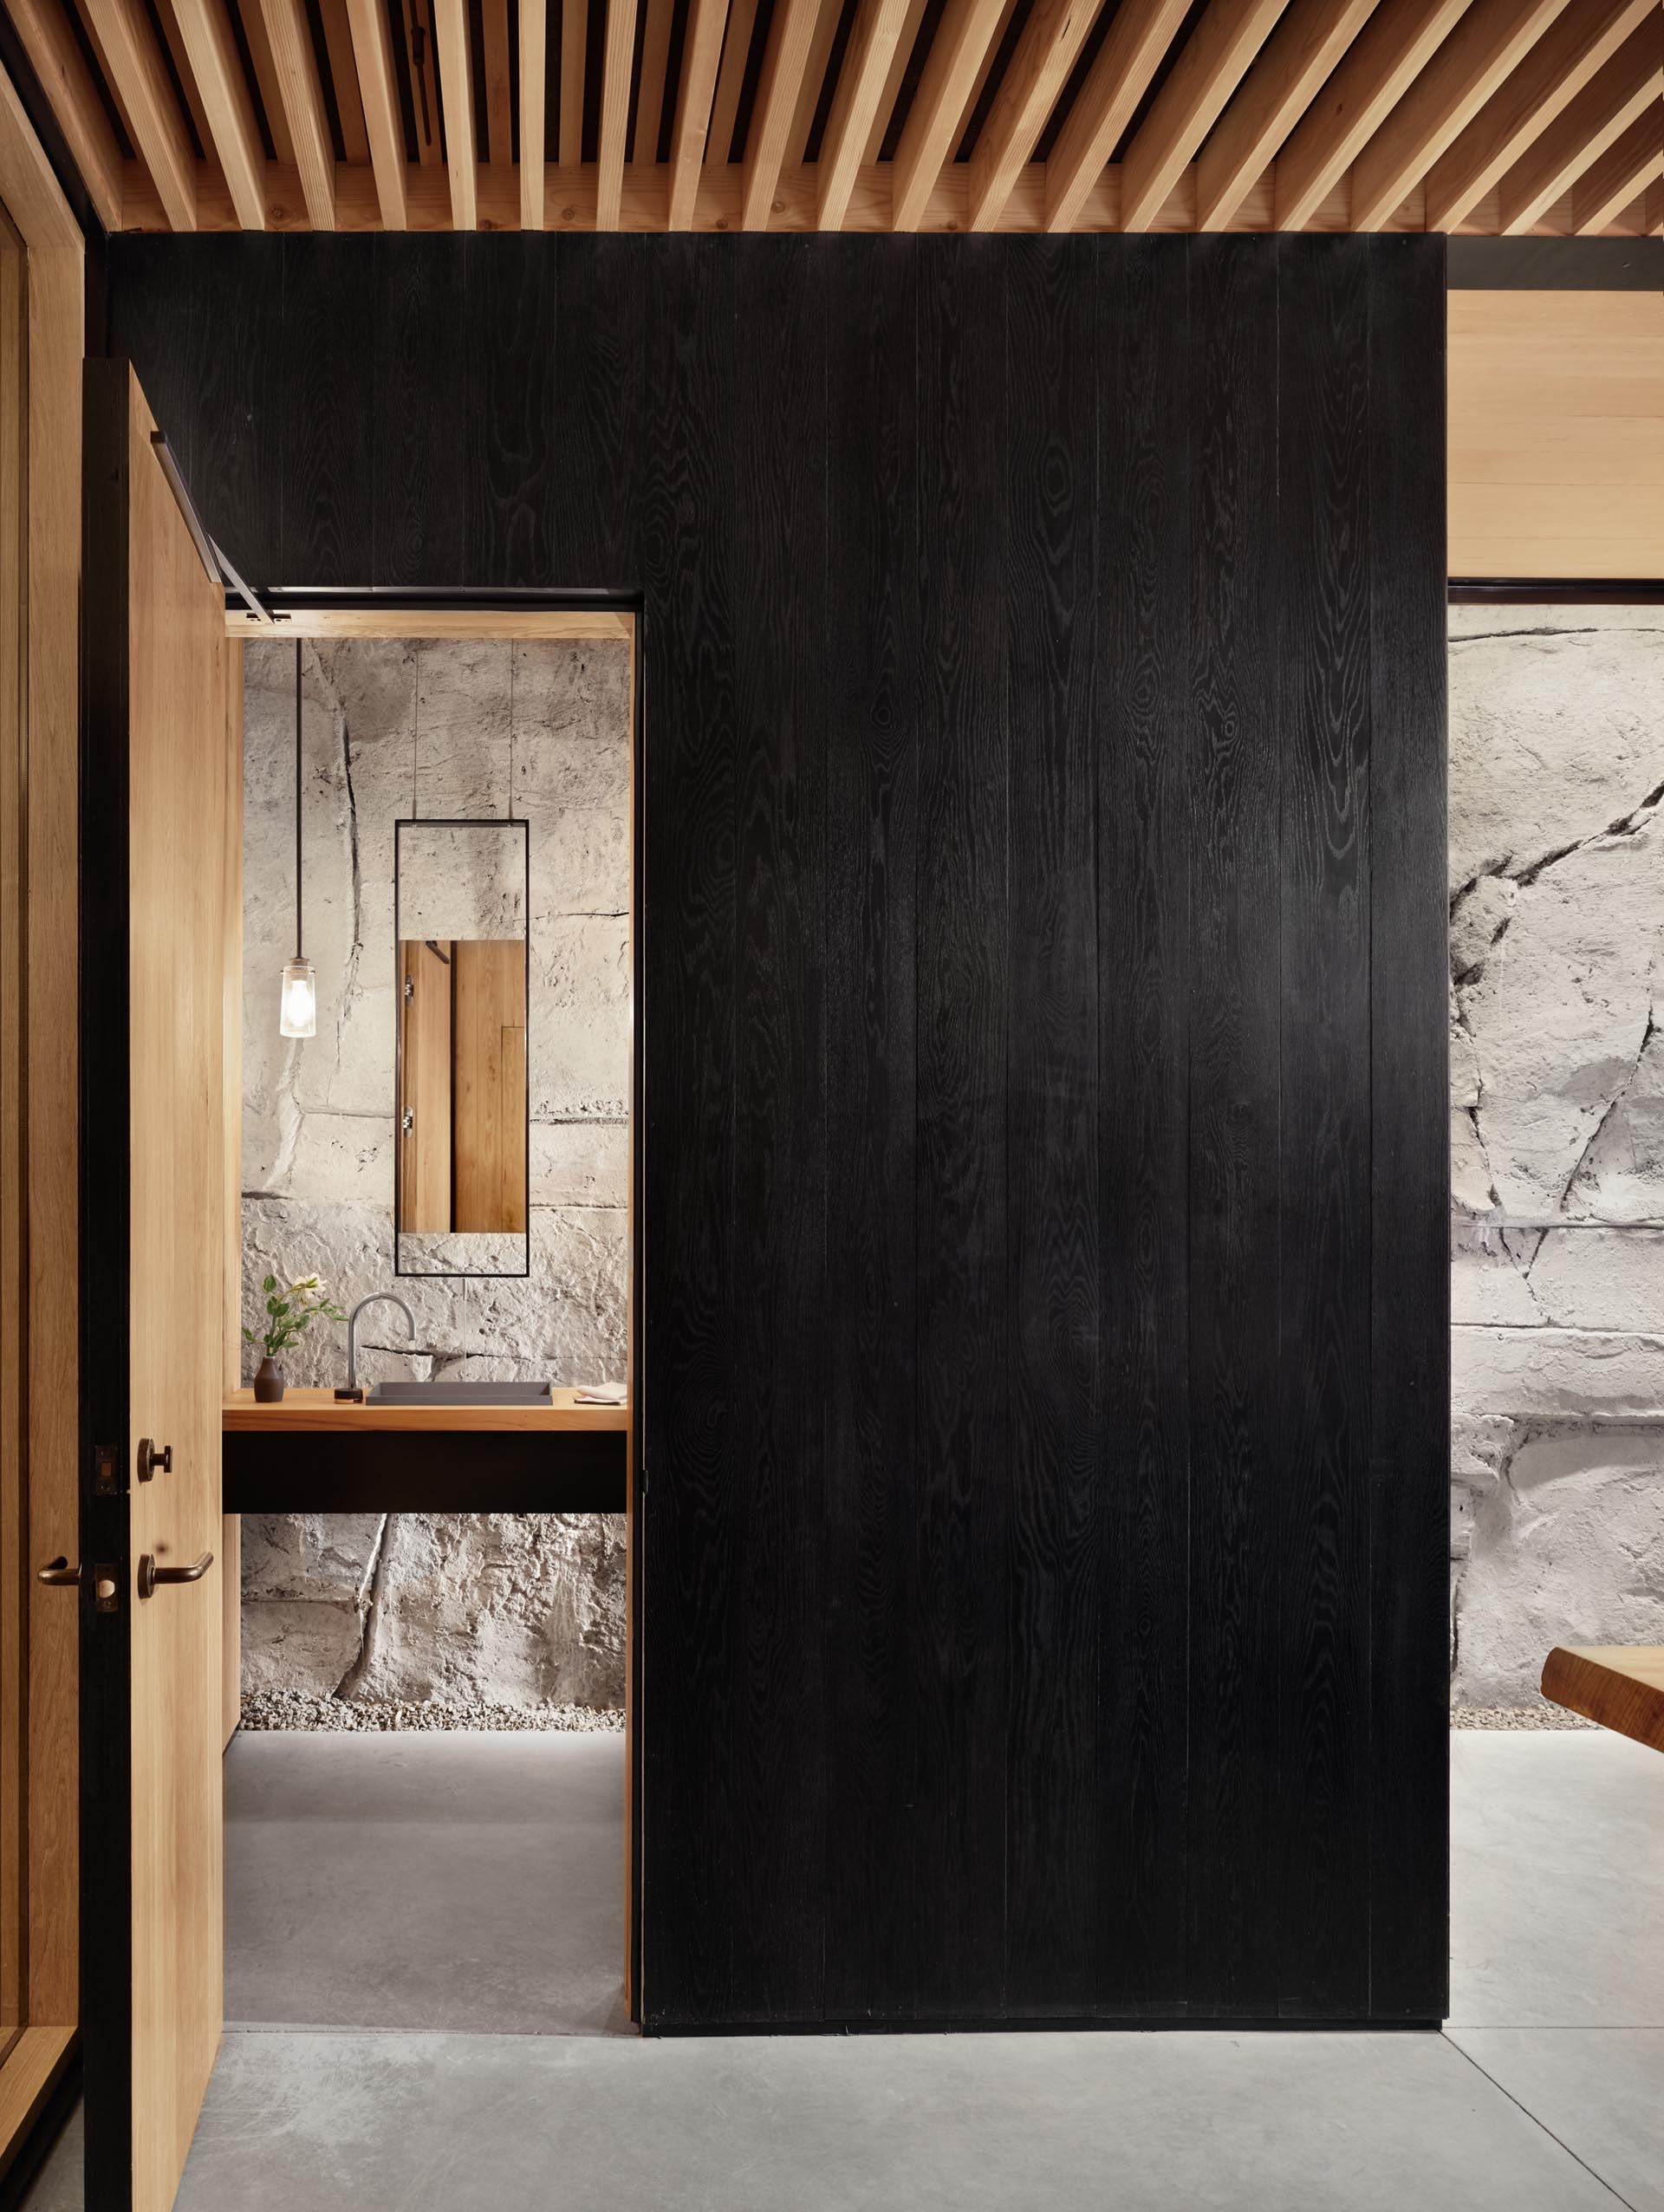 A bathroom hidden within an ebonized wood box includes a floating vanity and hanging mirror.